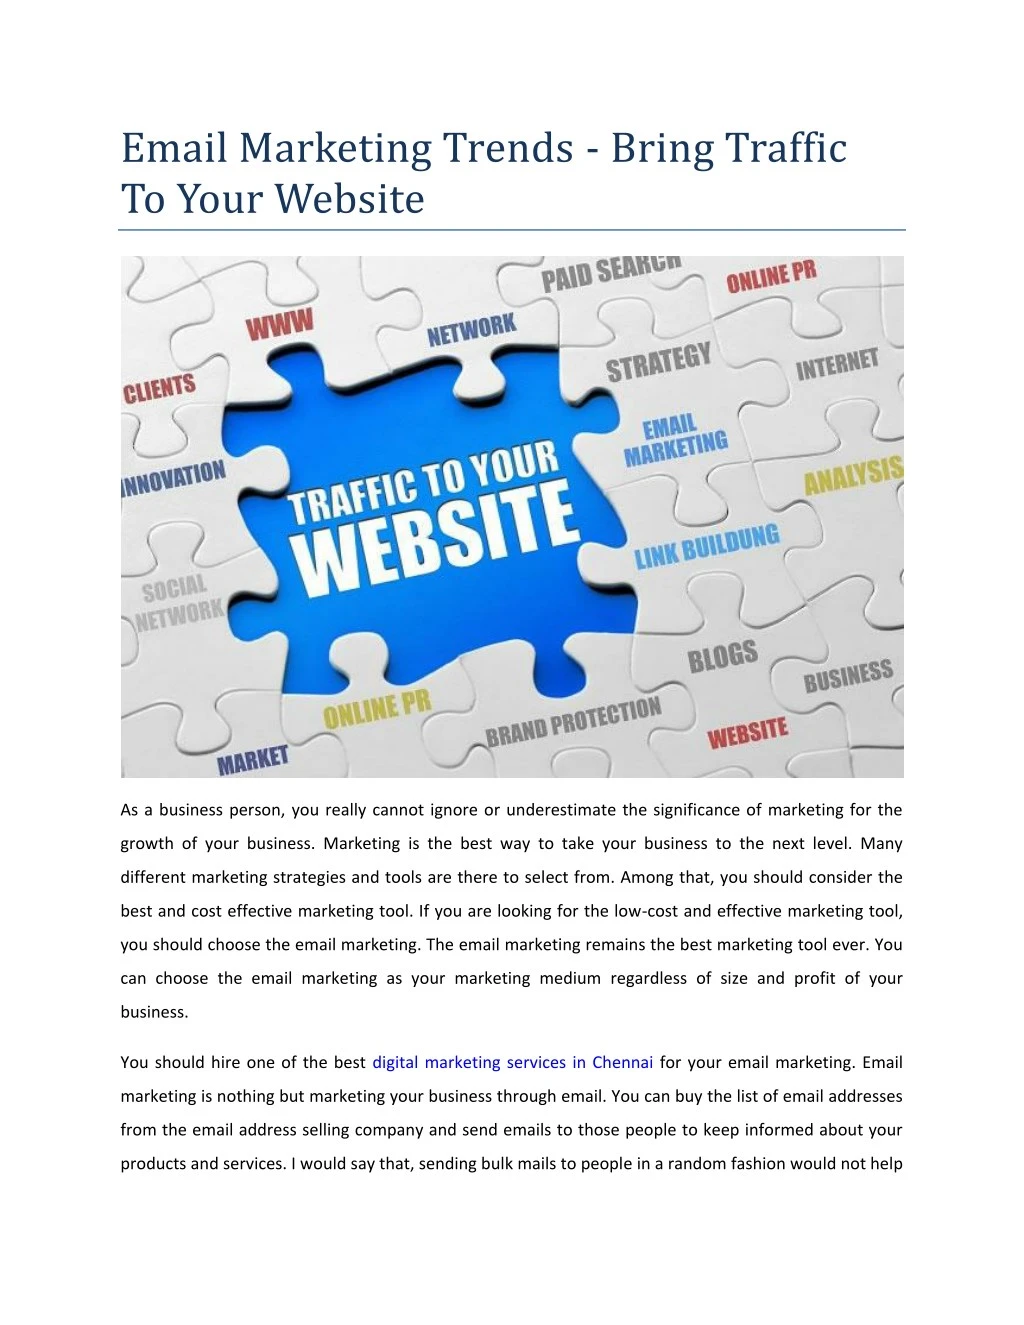 email marketing trends bring traffic to your